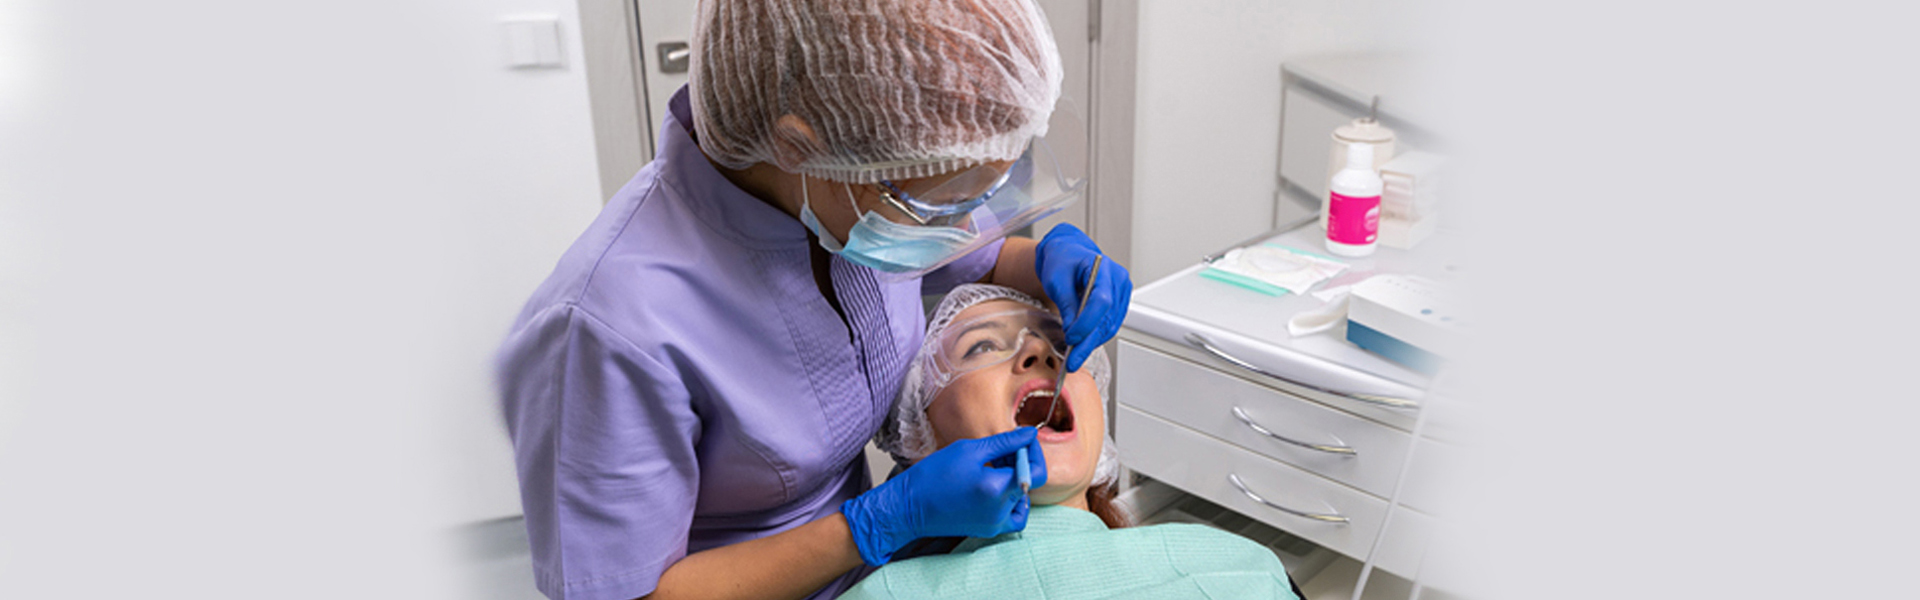 How long does a typical dental cleaning appointment last?